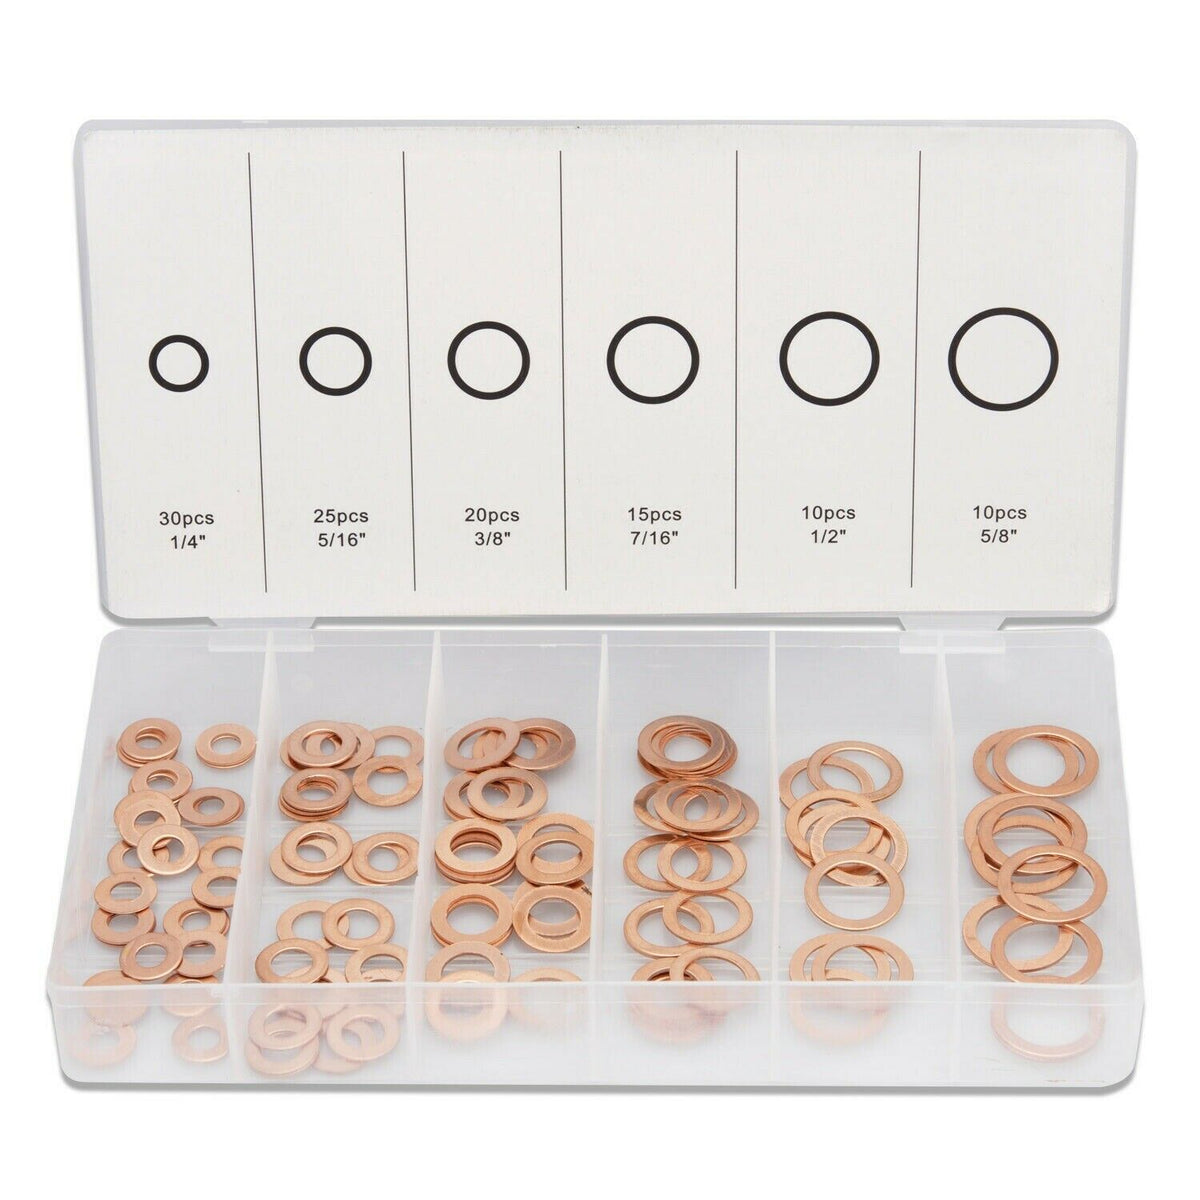 110Pc Solid Copper Crush Washer Seals Flat Ring Gasket Assortment Organizer Case